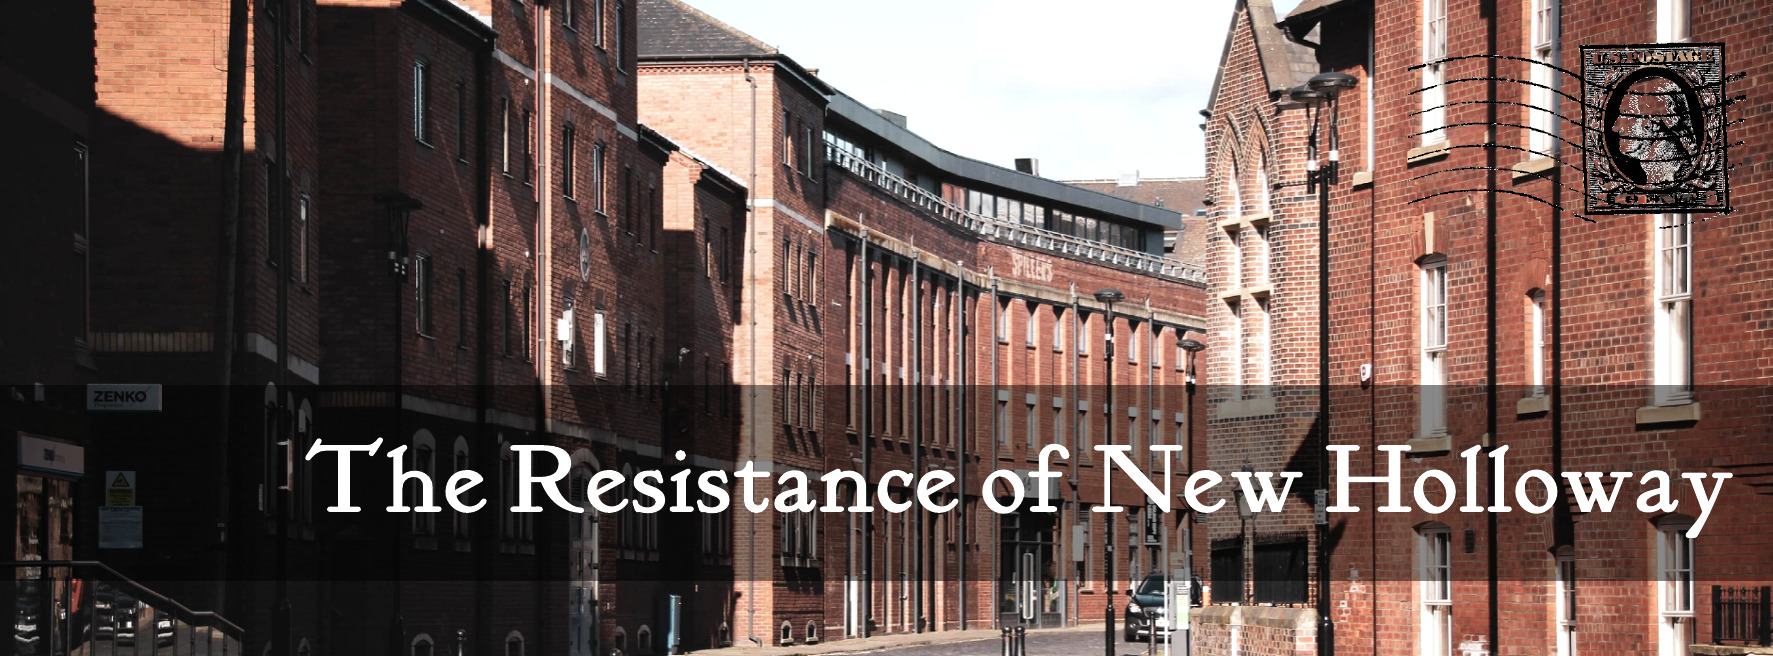 The Resistance of New Holloway